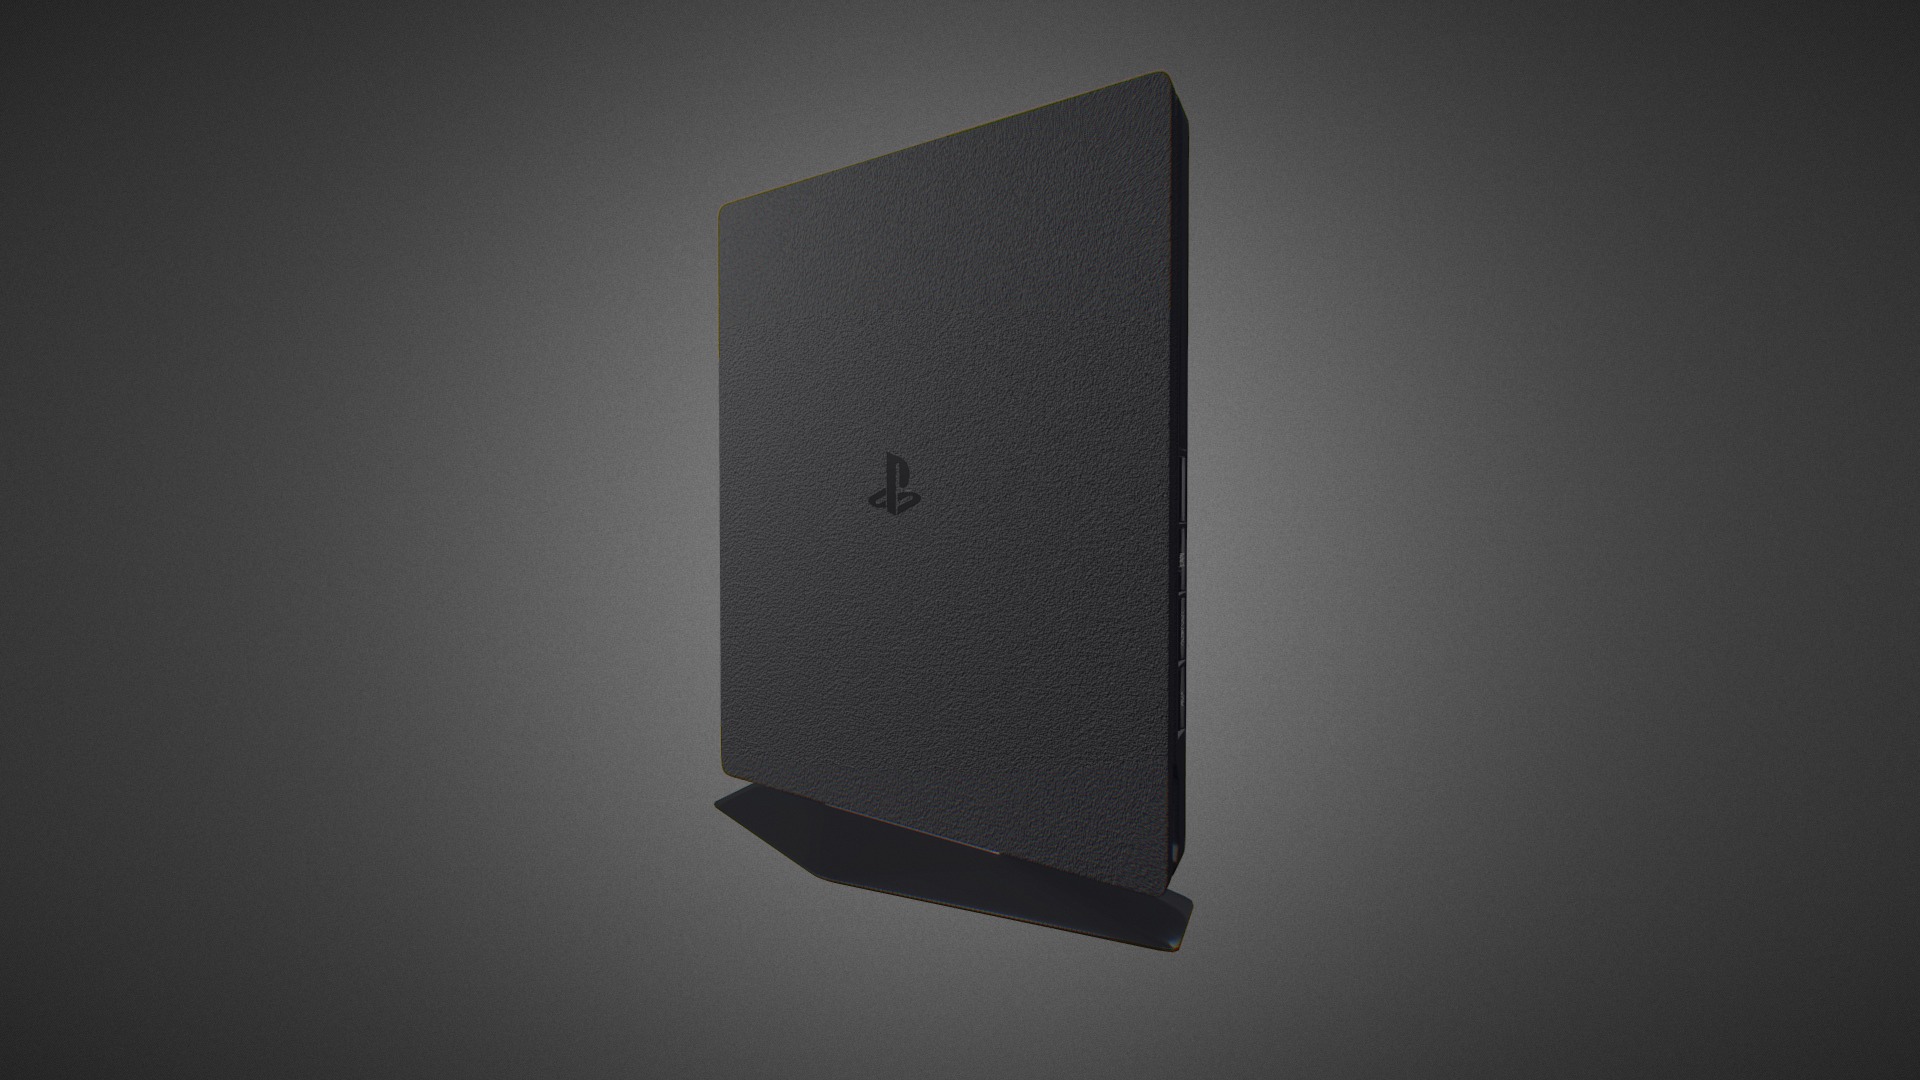 3D model Sony PlayStation 4 Slim for Element 3D - This is a 3D model of the Sony PlayStation 4 Slim for Element 3D. The 3D model is about a square object with a logo on it.